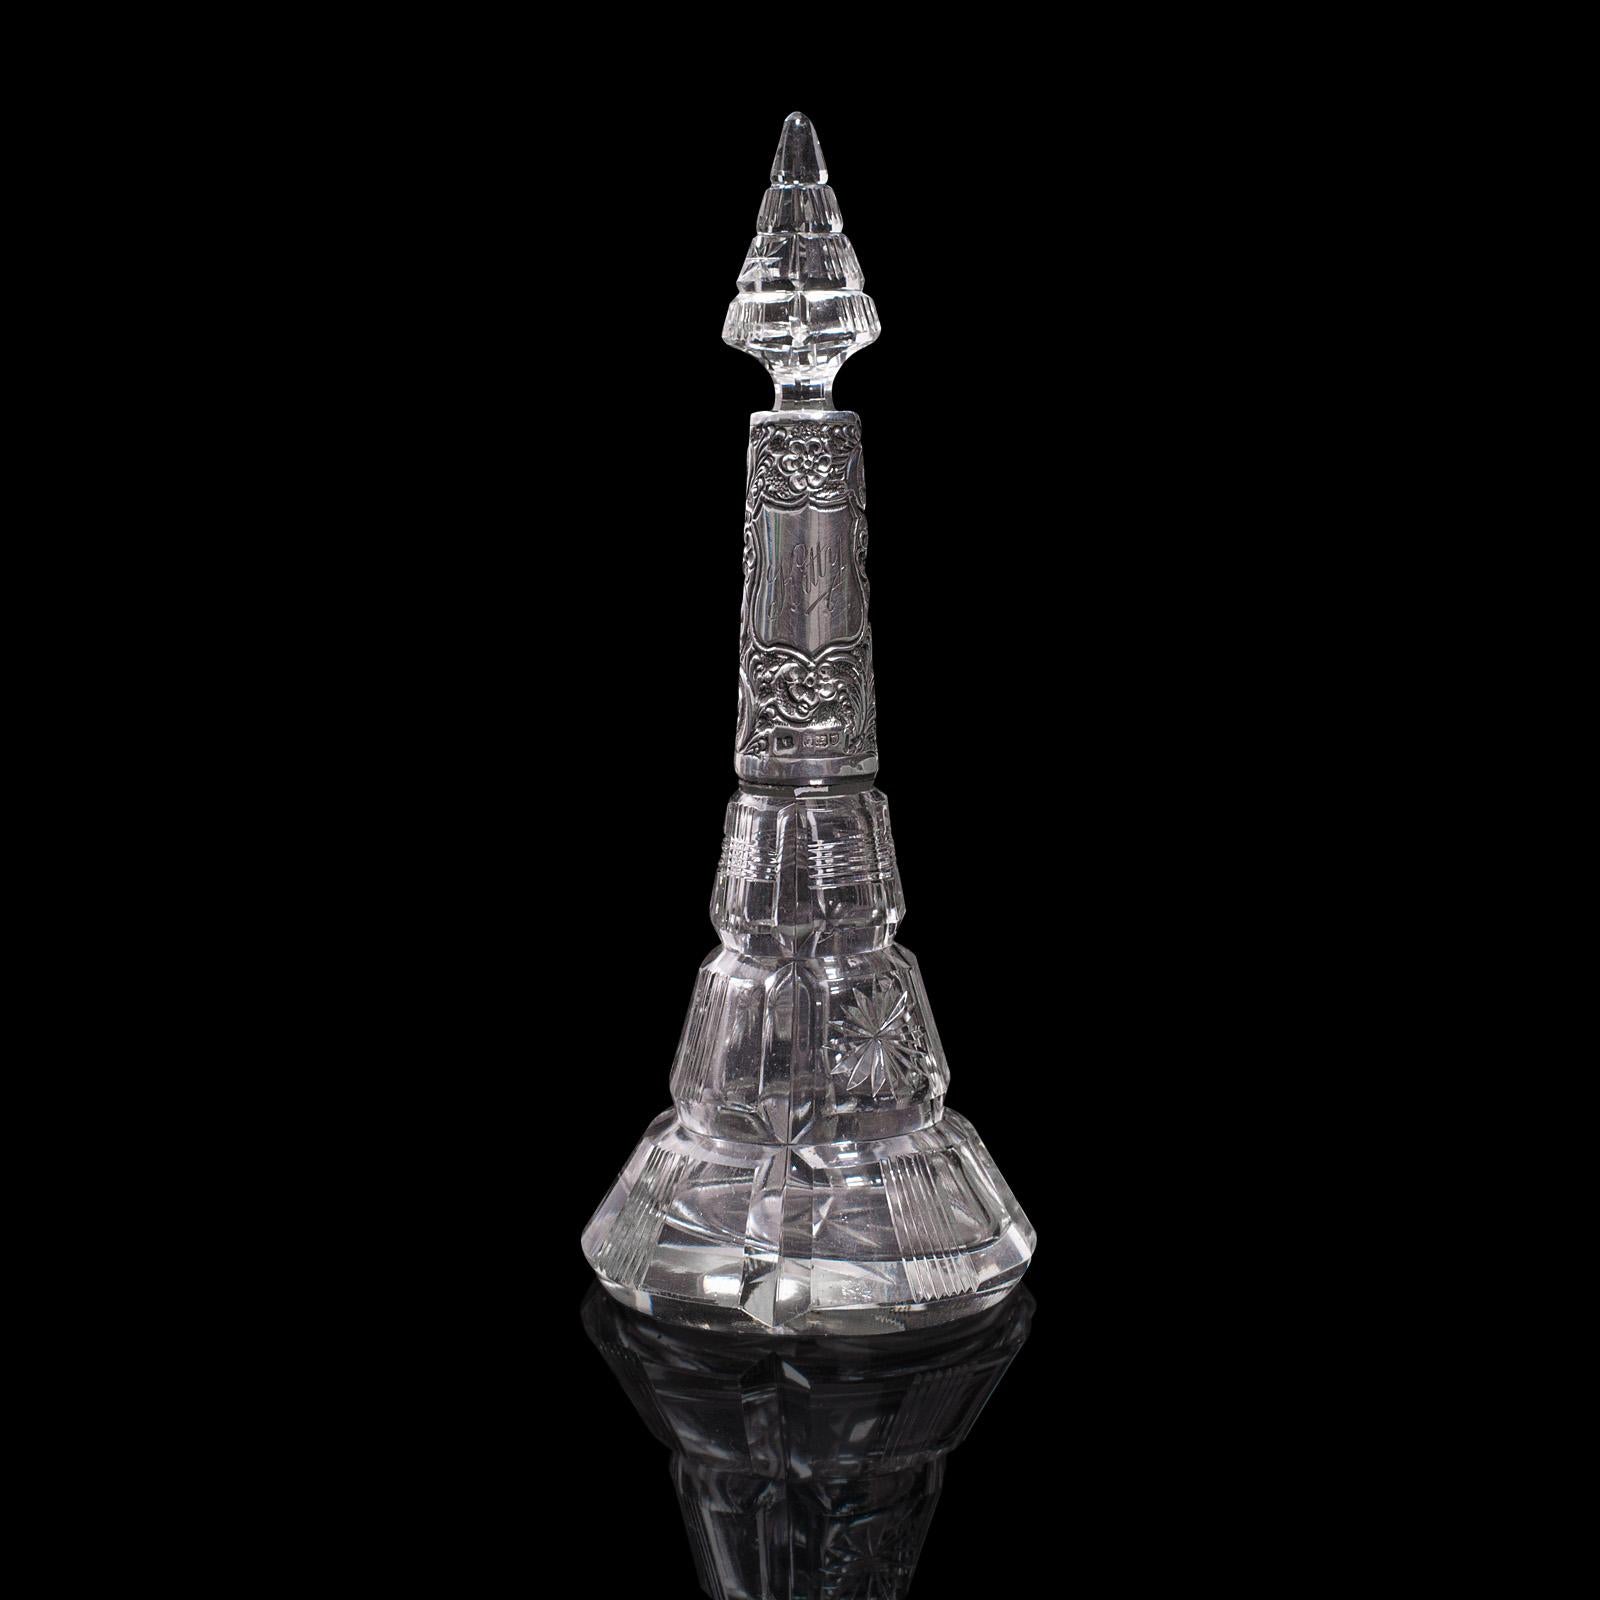 This is an antique scent bottle. An English, glass and silver perfume bottle, with London hallmark, dated for 1912.

Wonderfully presented, with Art Nouveau overtones
Displays a desirable aged patina and in good order
Cut glass with a clear,